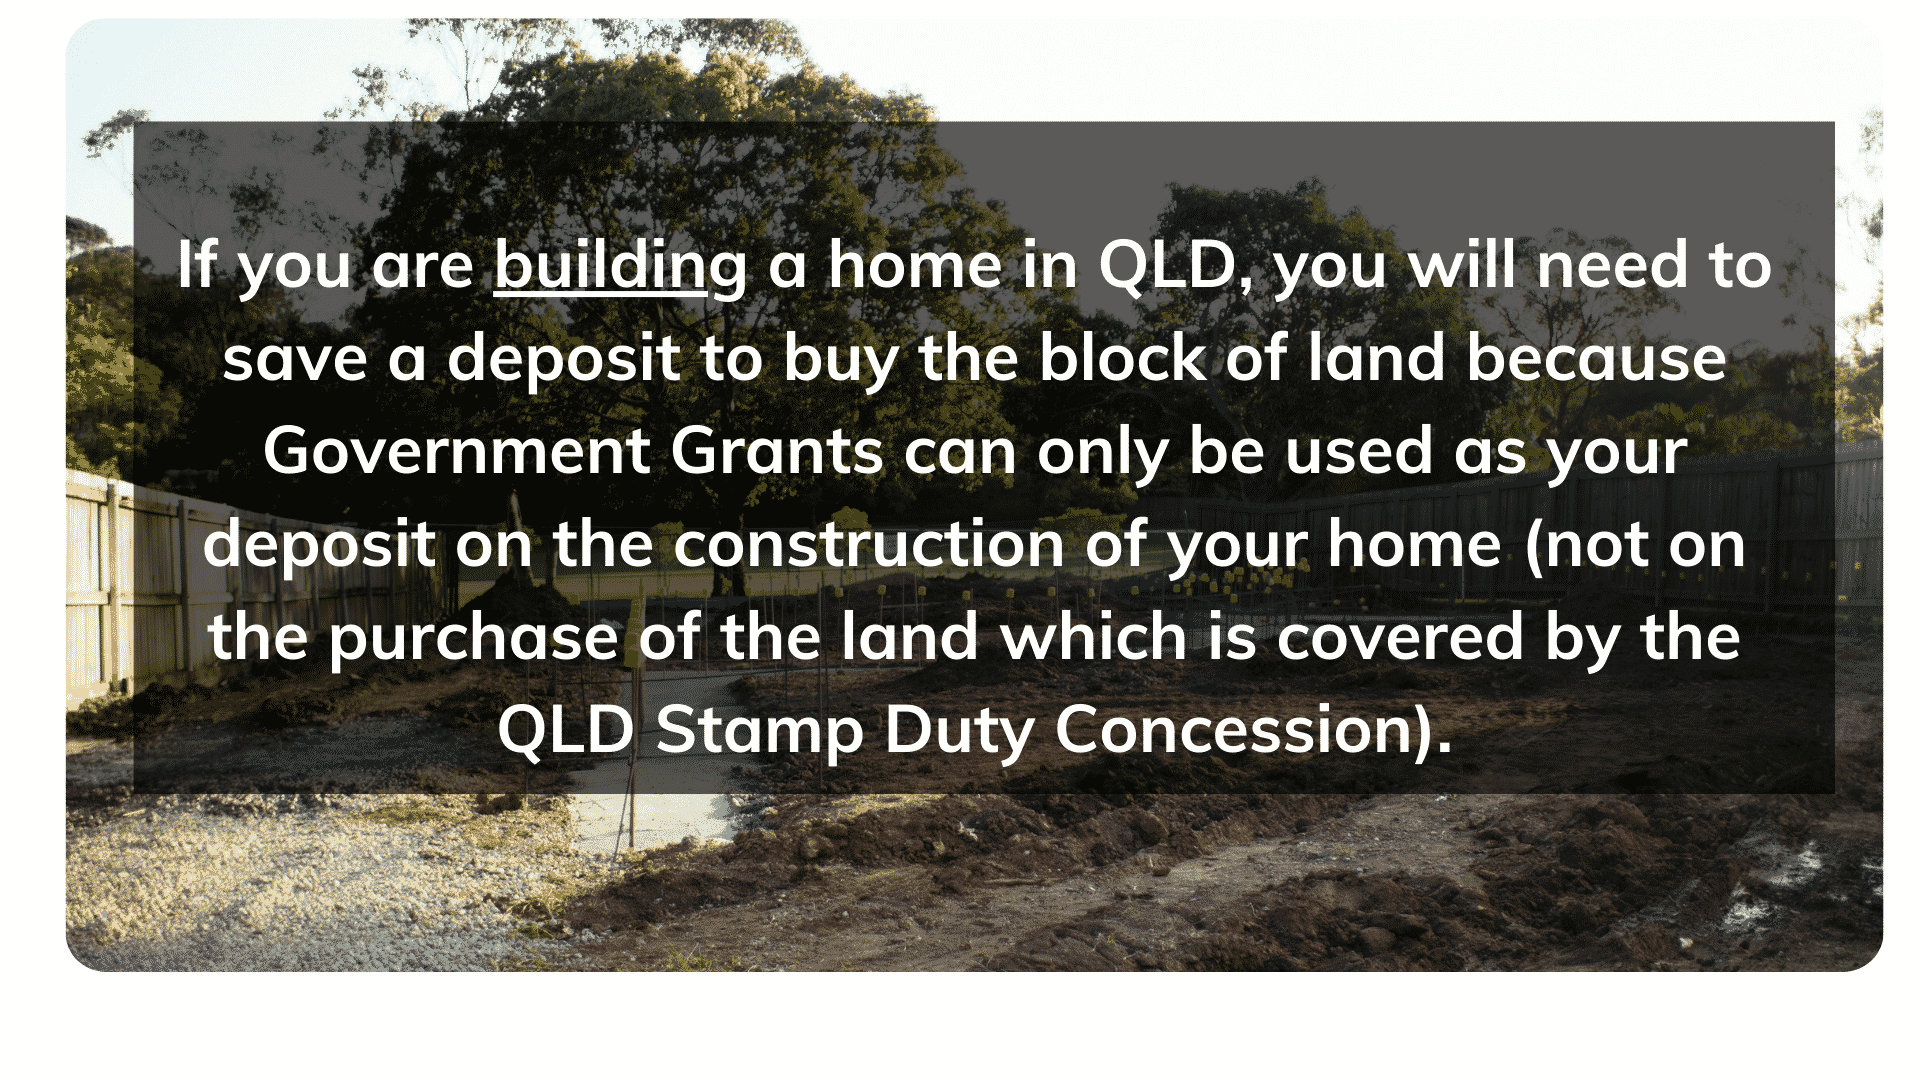 If you are building a home in QLD, you will need to save a deposit to buy the block of land